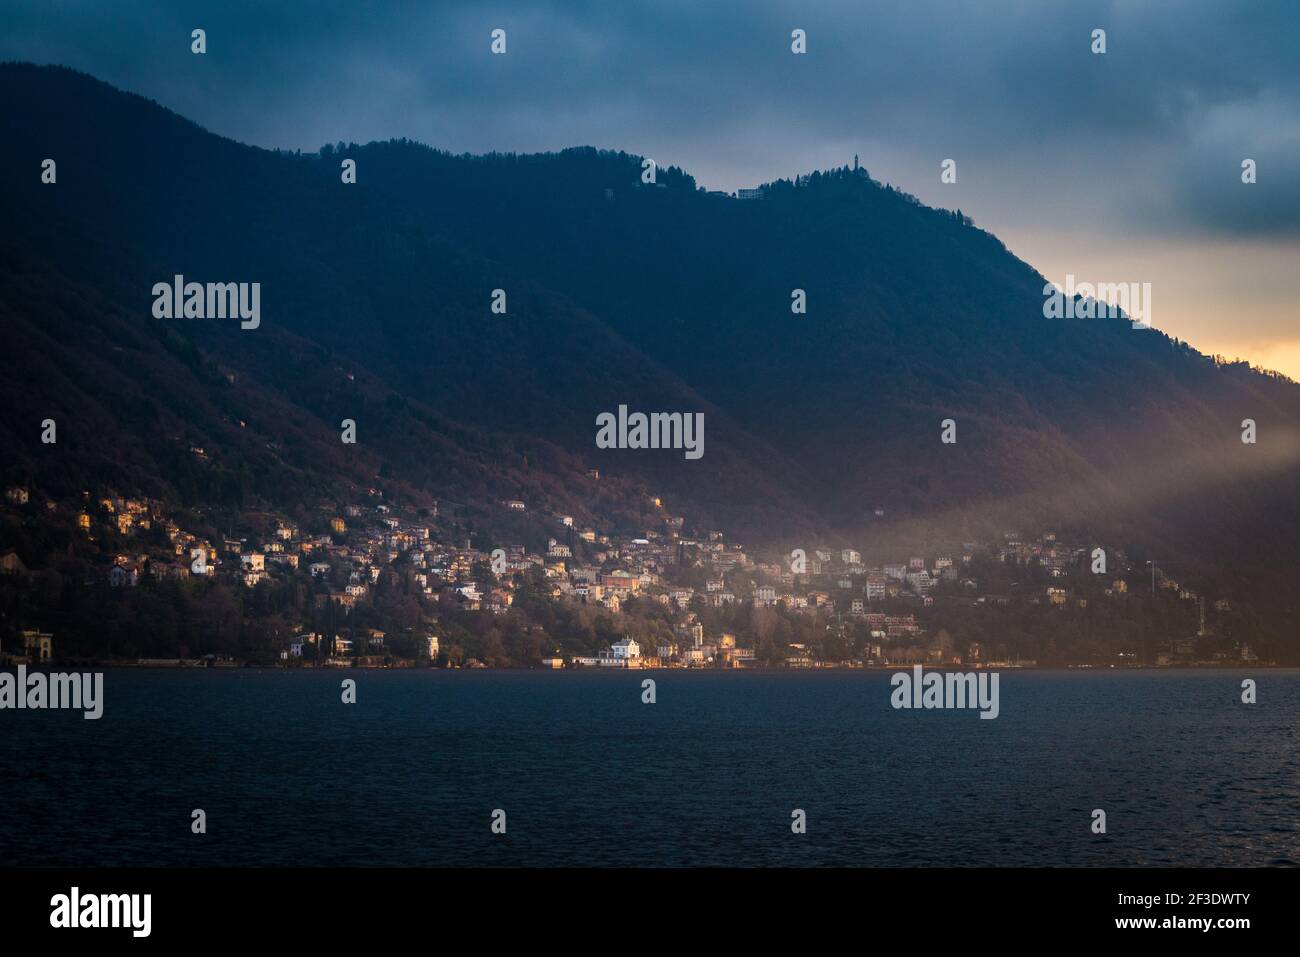 Cropped photo of village in wooded slope on opposite shore of lake. Buildings illuminated by rays of sun. Stock Photo